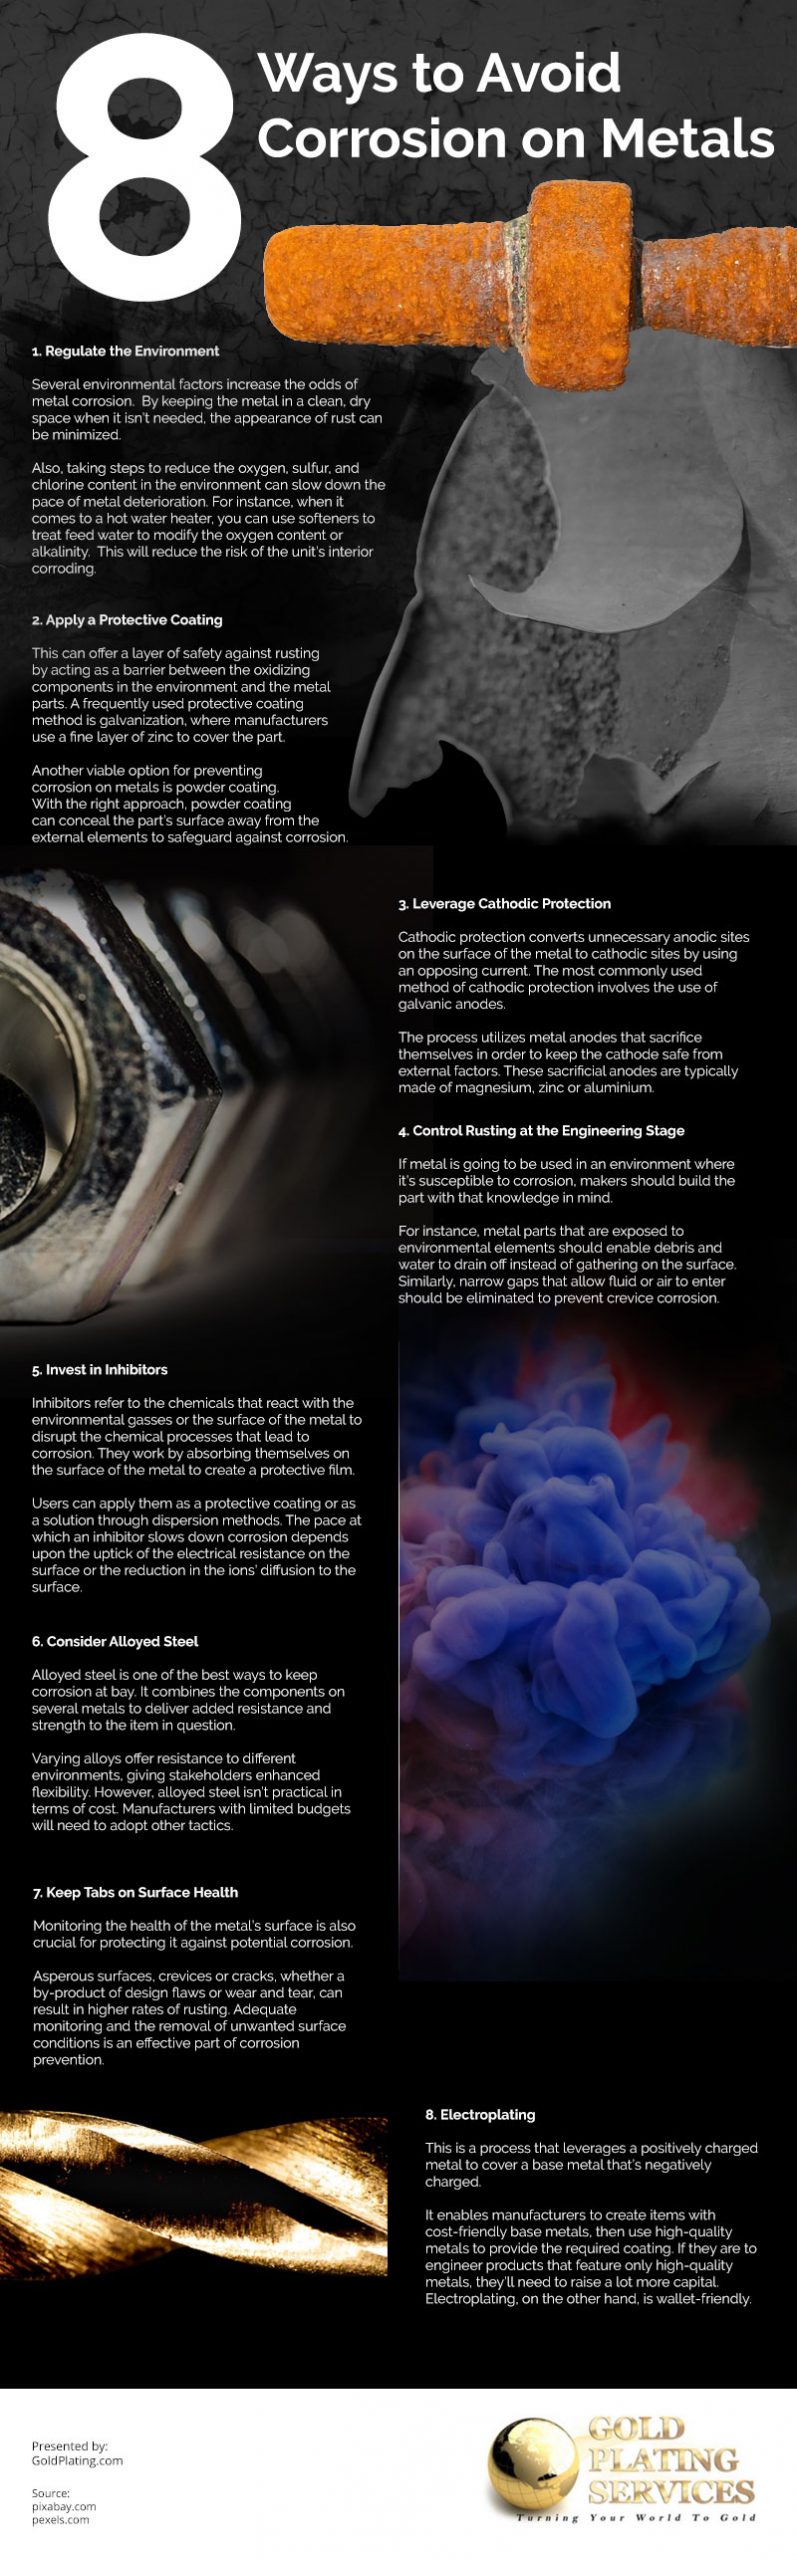 8 Ways to Avoid Corrosion on Metals Infographic